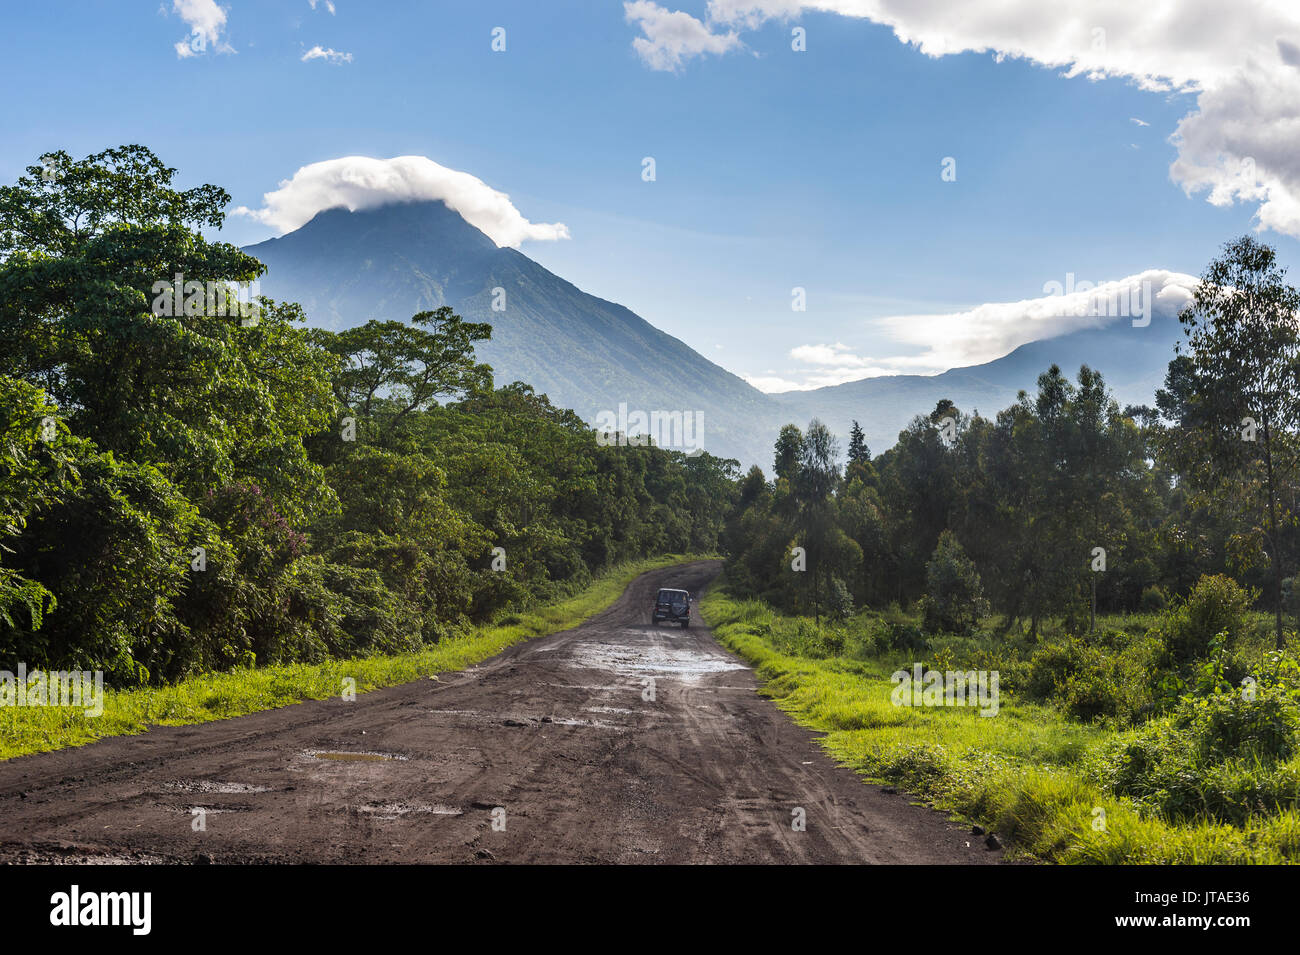 The volcanic mountain chain of the Virunga National Park, UNESCO World Heritage Site, Democratic Republic of the Congo, Africa Stock Photo